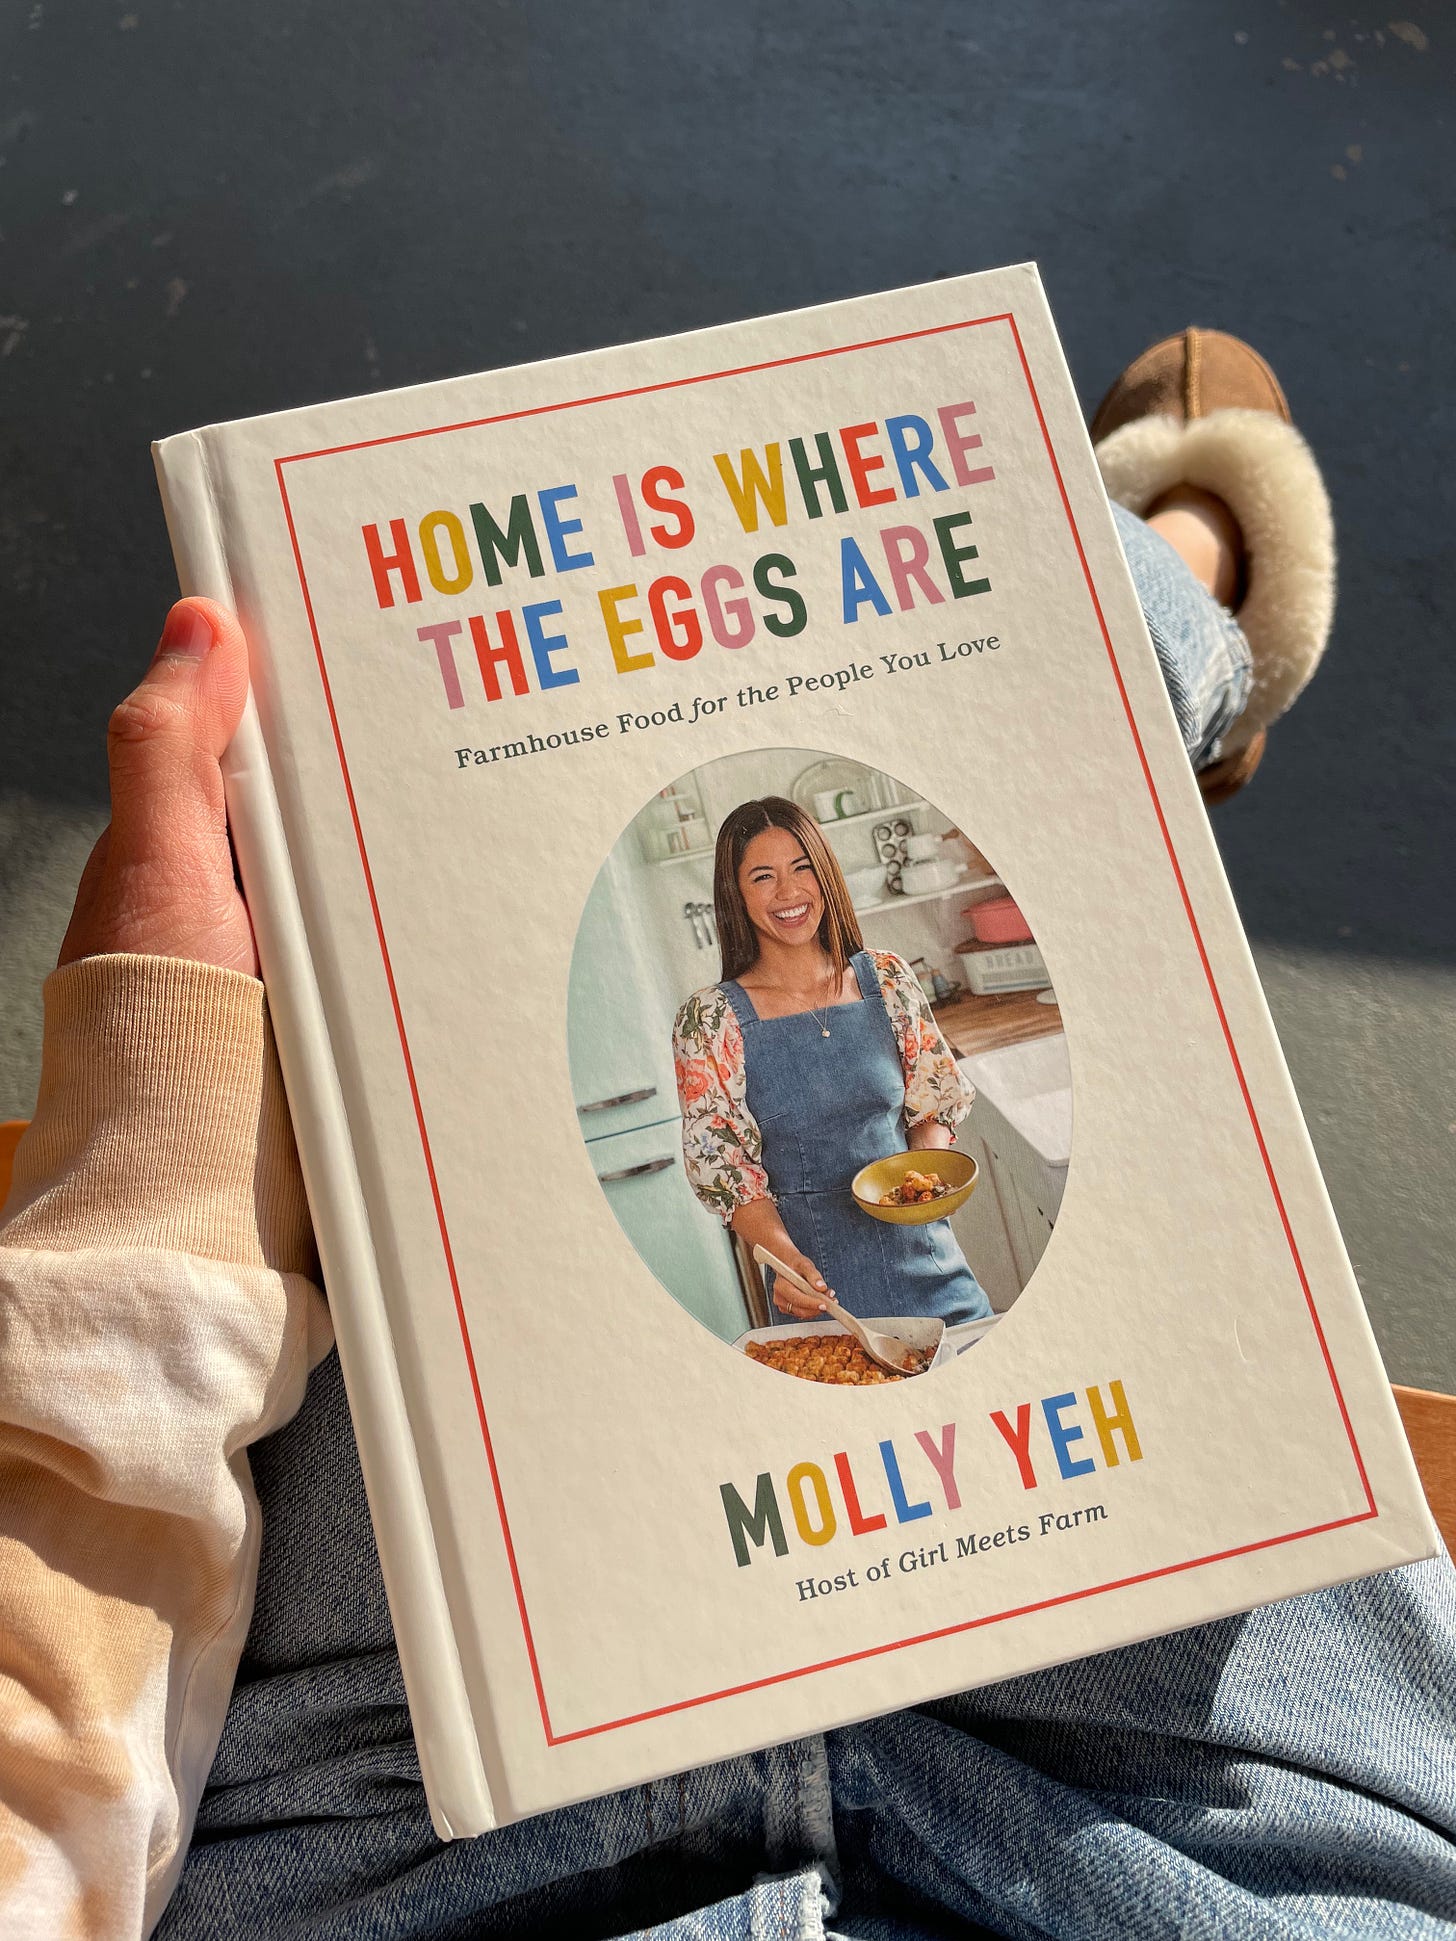 Home is Where the Eggs are cookbook held in the sun. Molly Yeh is on the cover.